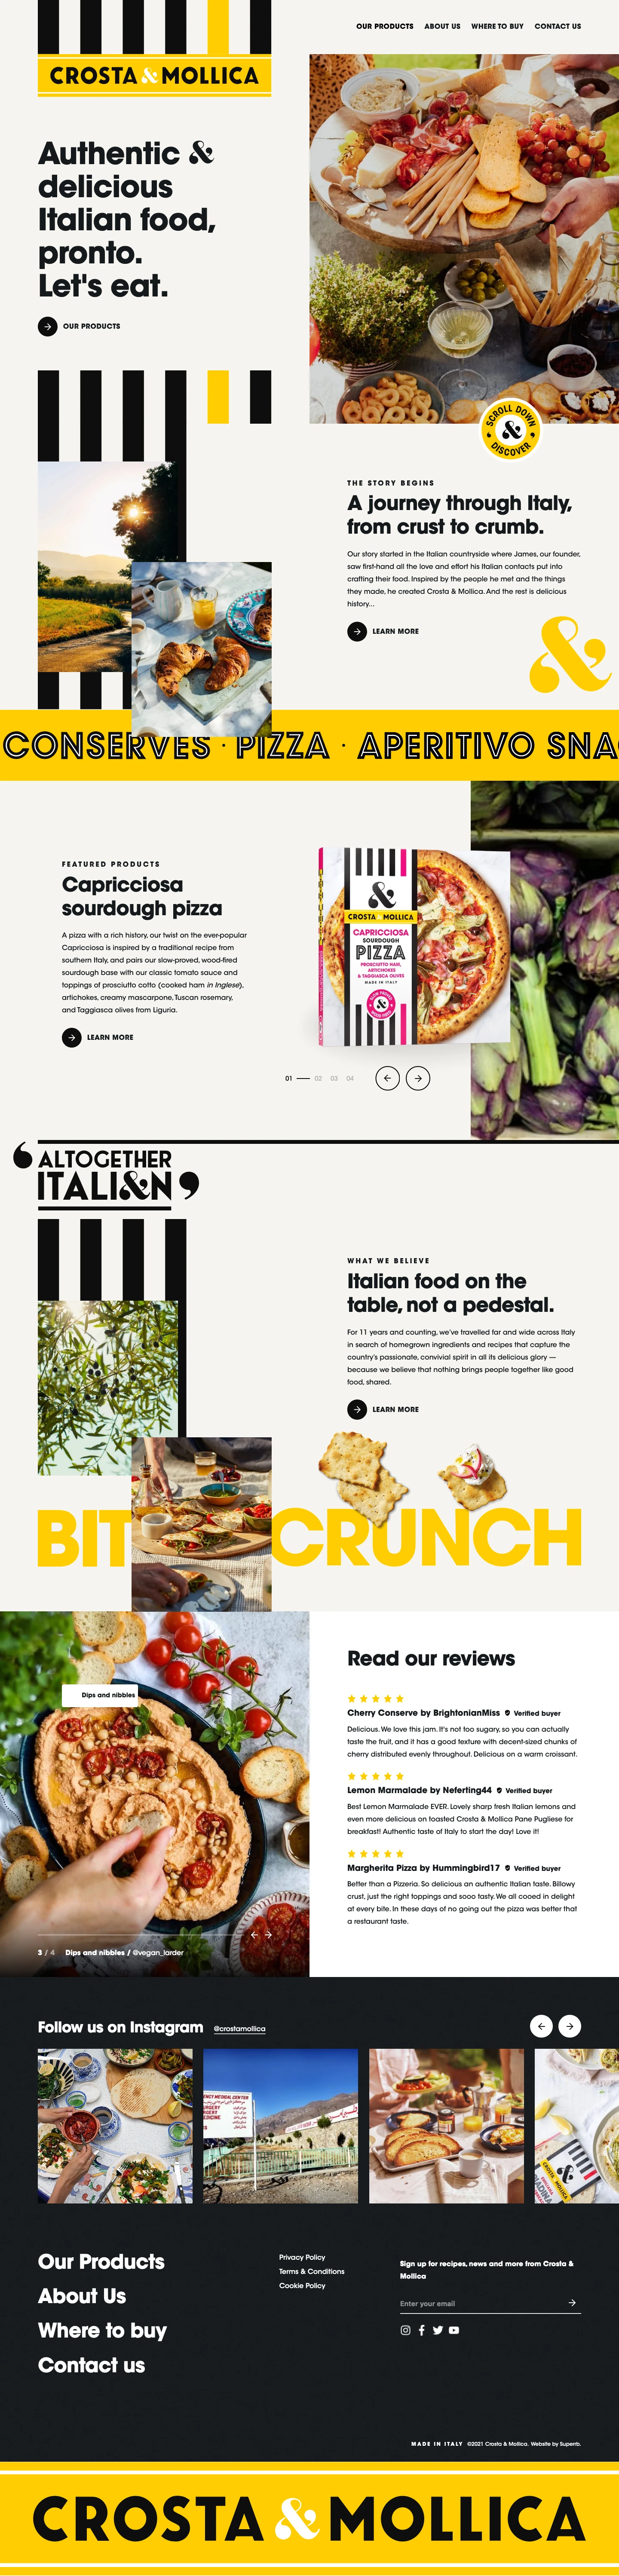 Crosta & Mollica Landing Page Example: Crosta & Mollica bring the best-tasting and most-authentic food - pizza, bread, aperitivo snacks, conserves, flatbreads and more - from Italy to tables around the world.